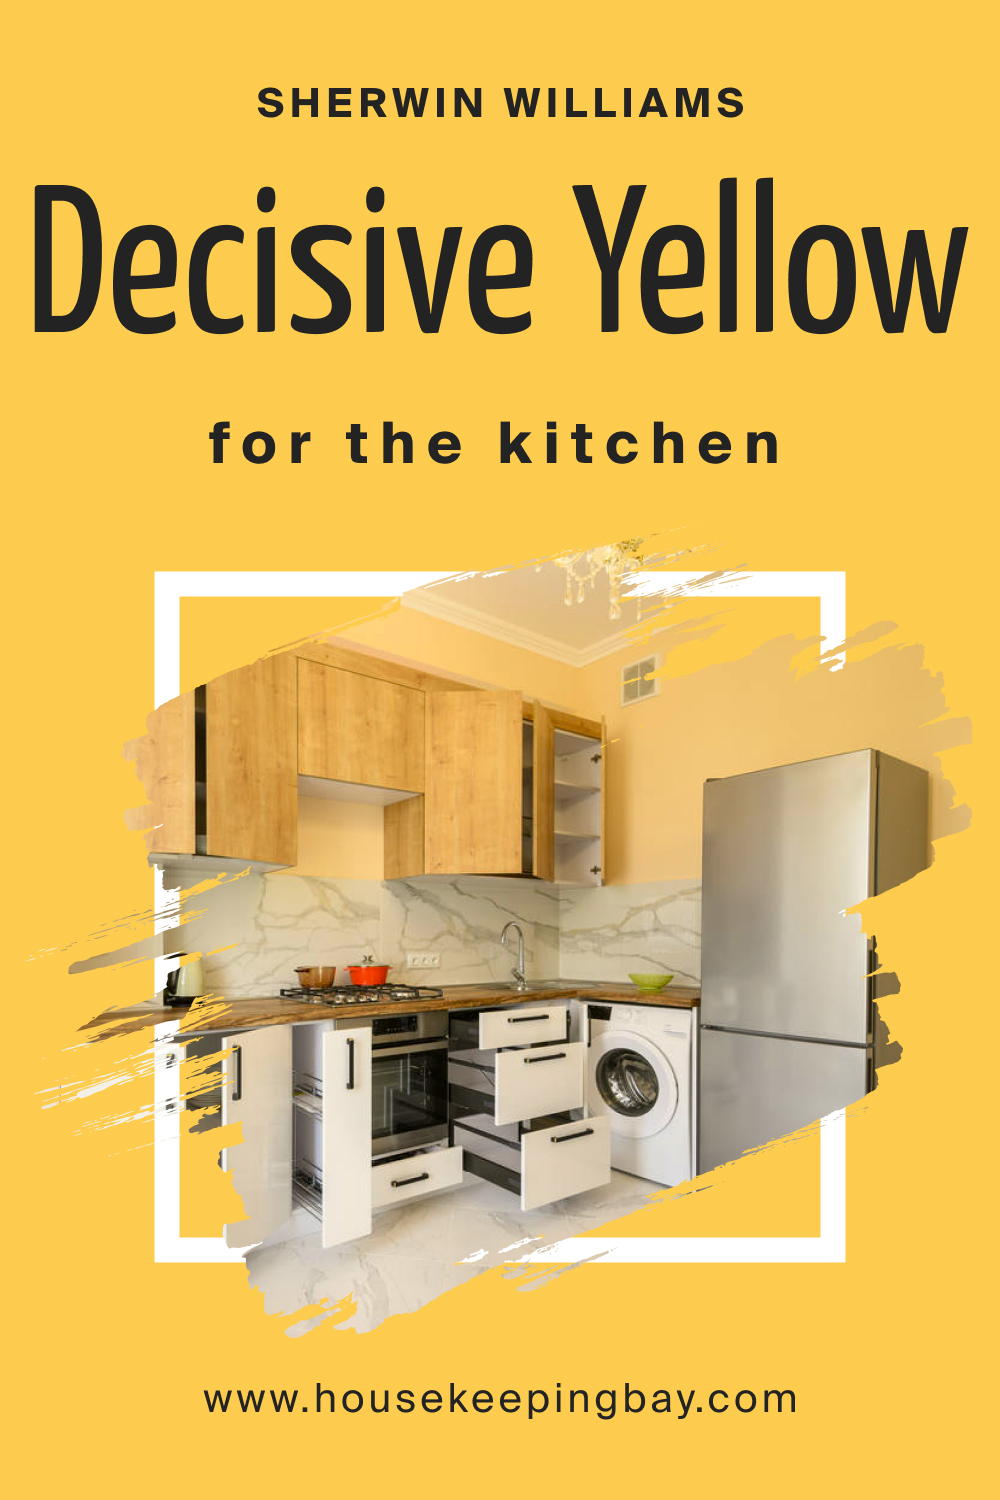 Sherwin Williams. Decisive Yellow SW 6902 For the Kitchens